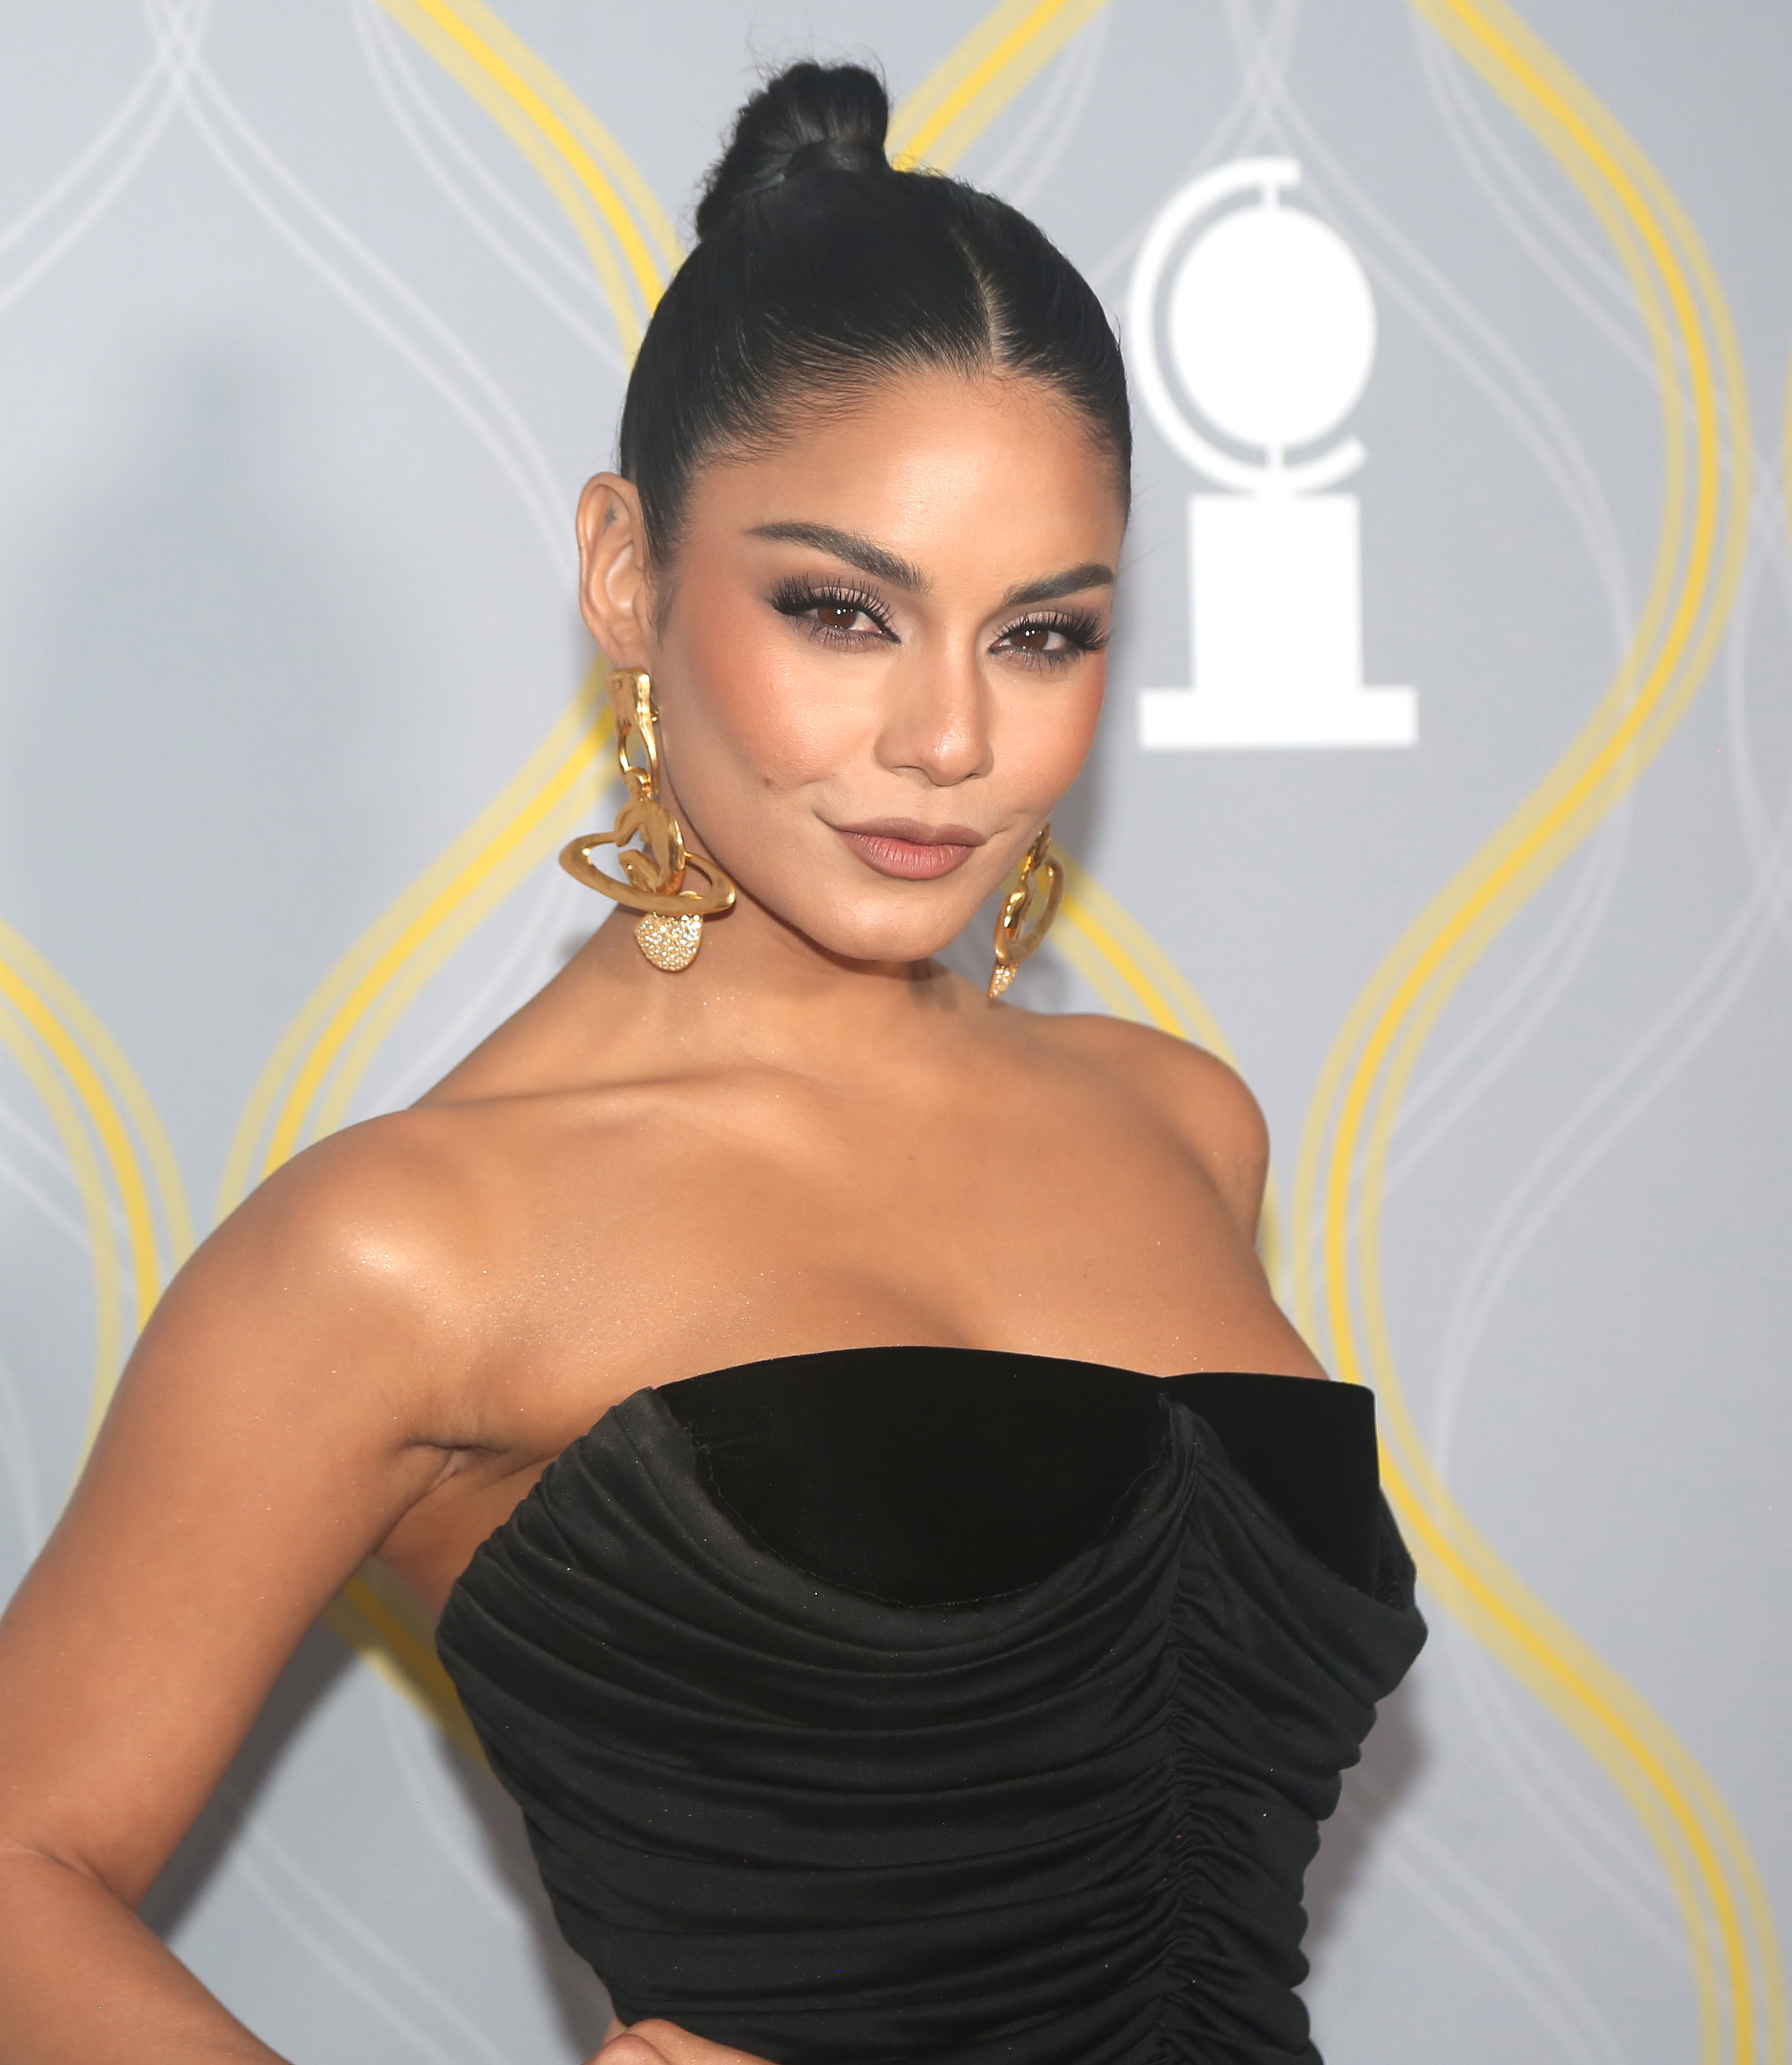 Close-up of Vanessa in a strapless outfit at a media event